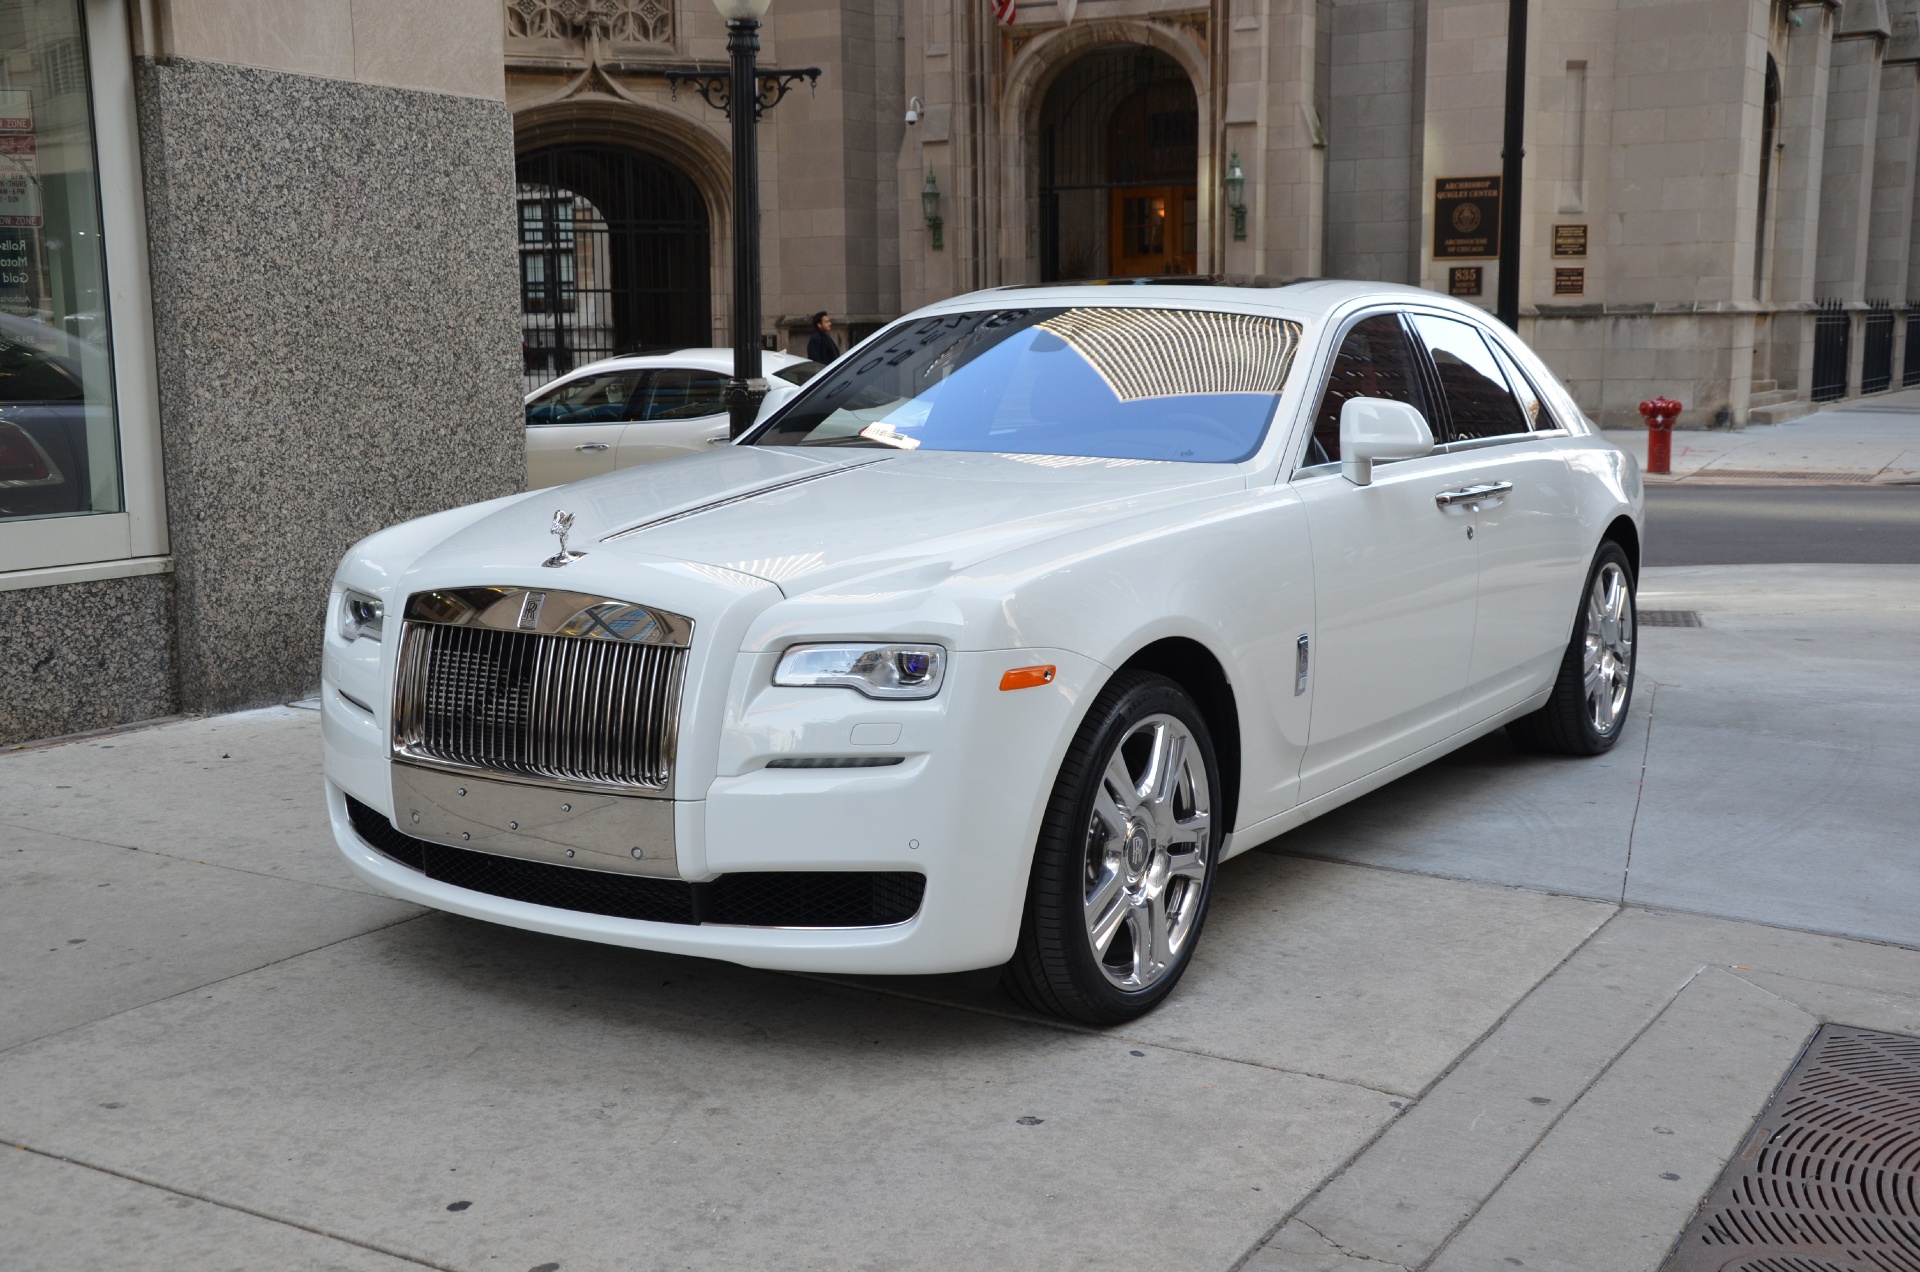 Amazing Rolls Royce Ghost Pictures & Backgrounds